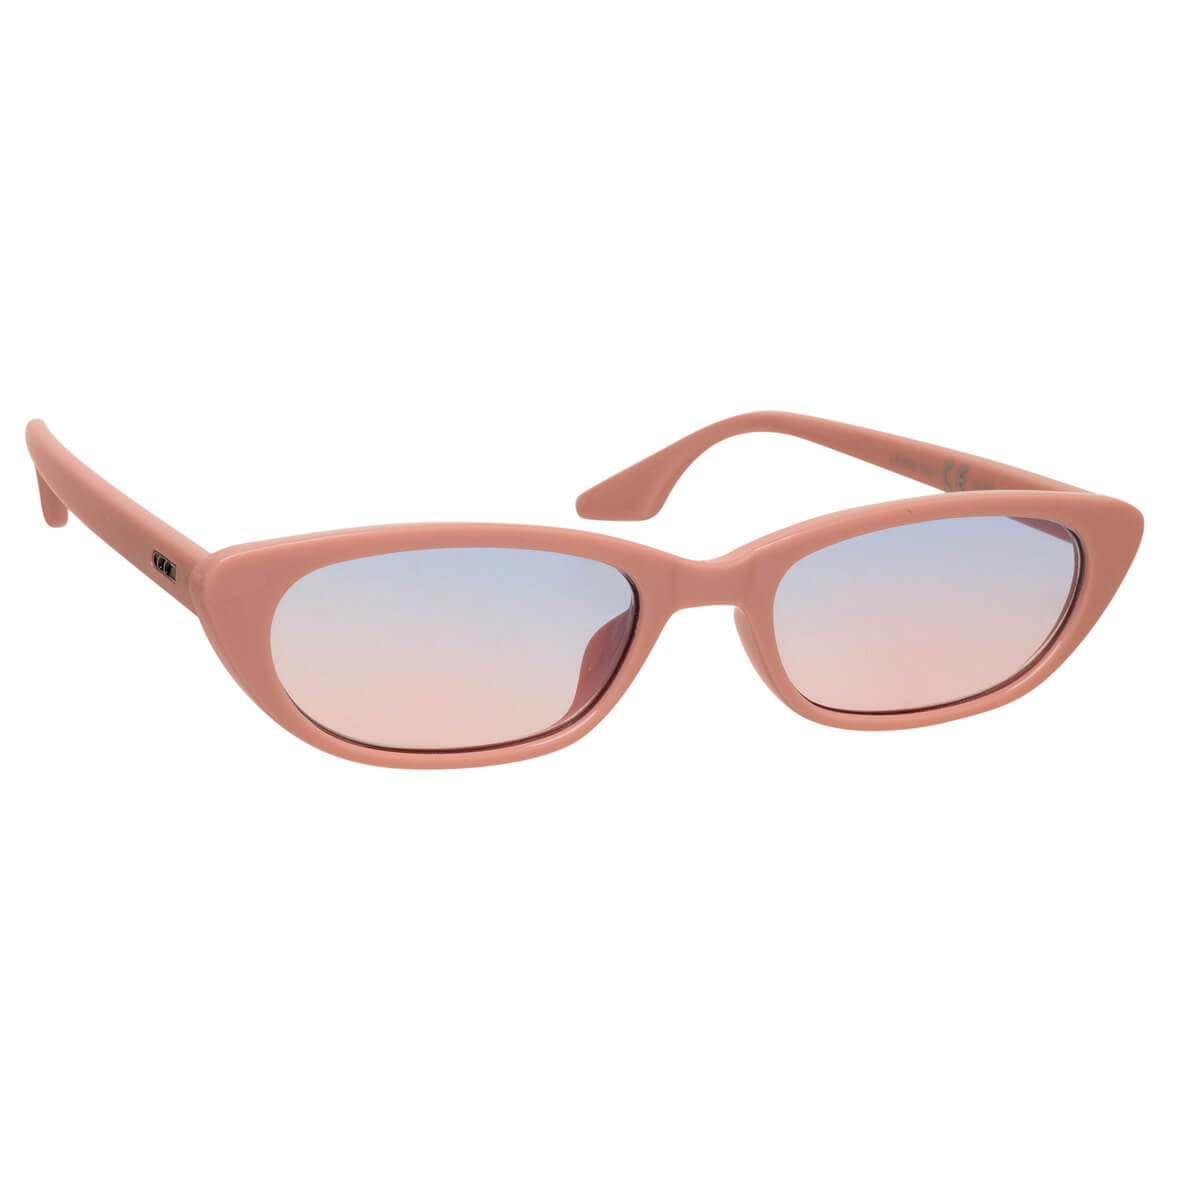 Low oval sunglasses with decoration